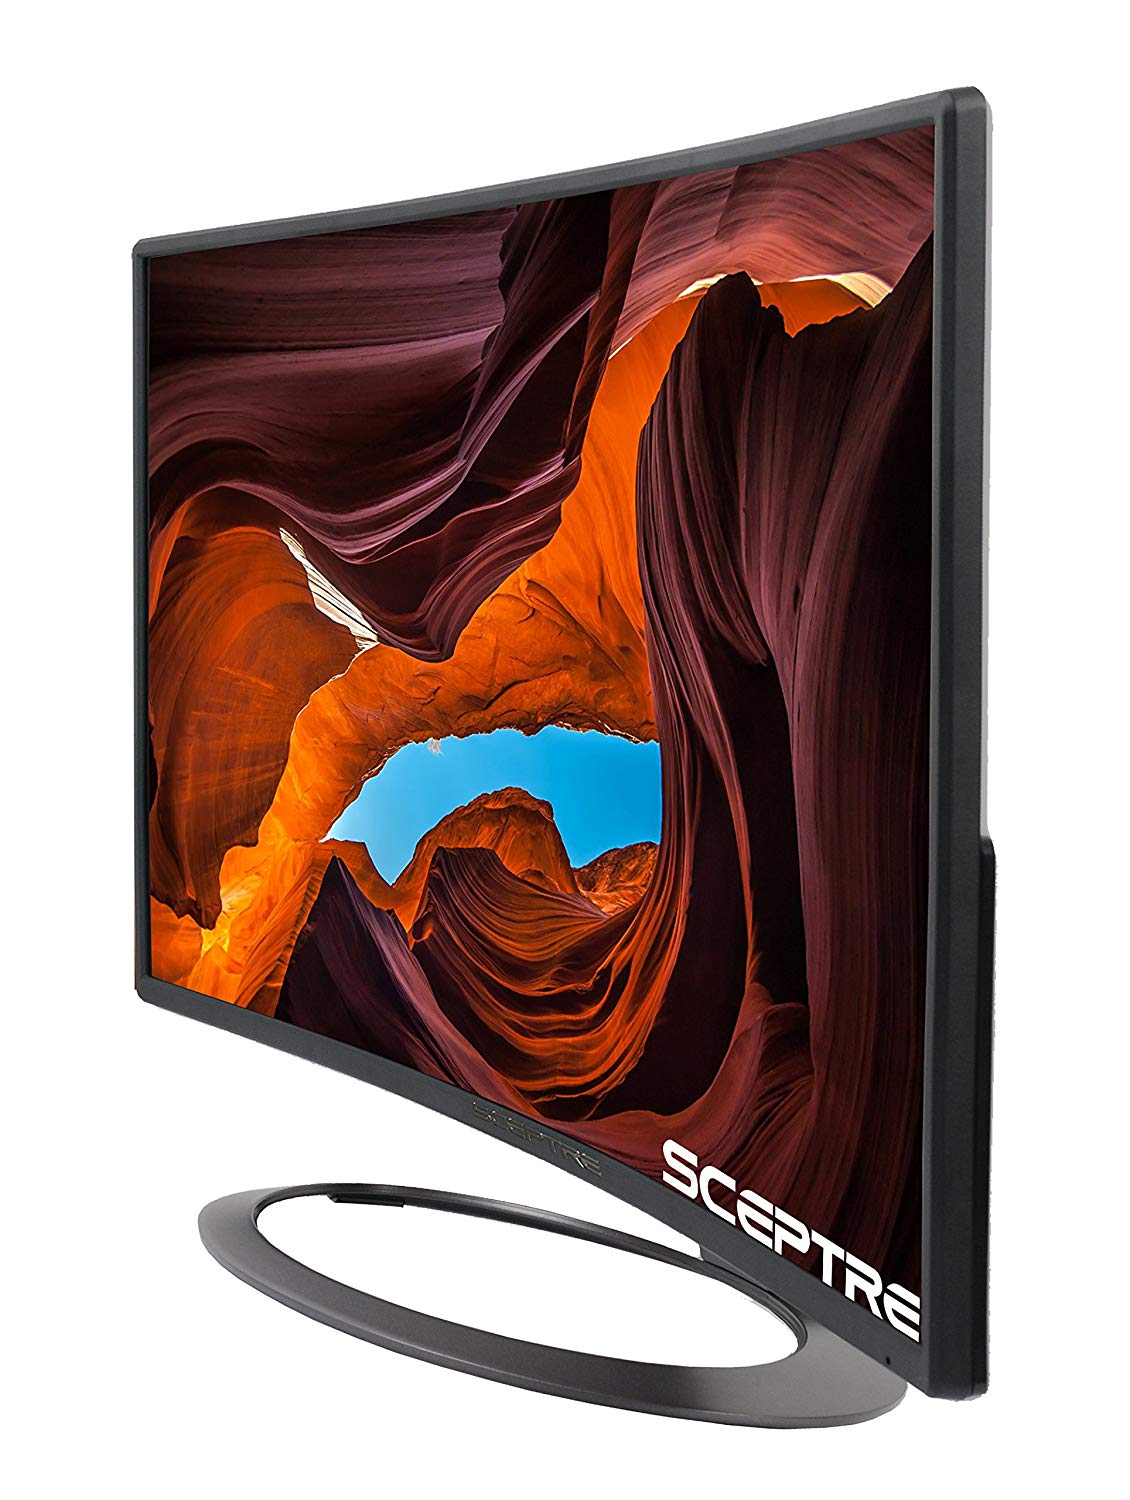 Gaming Monitor – Sceptre 27-Inch LED Monitor